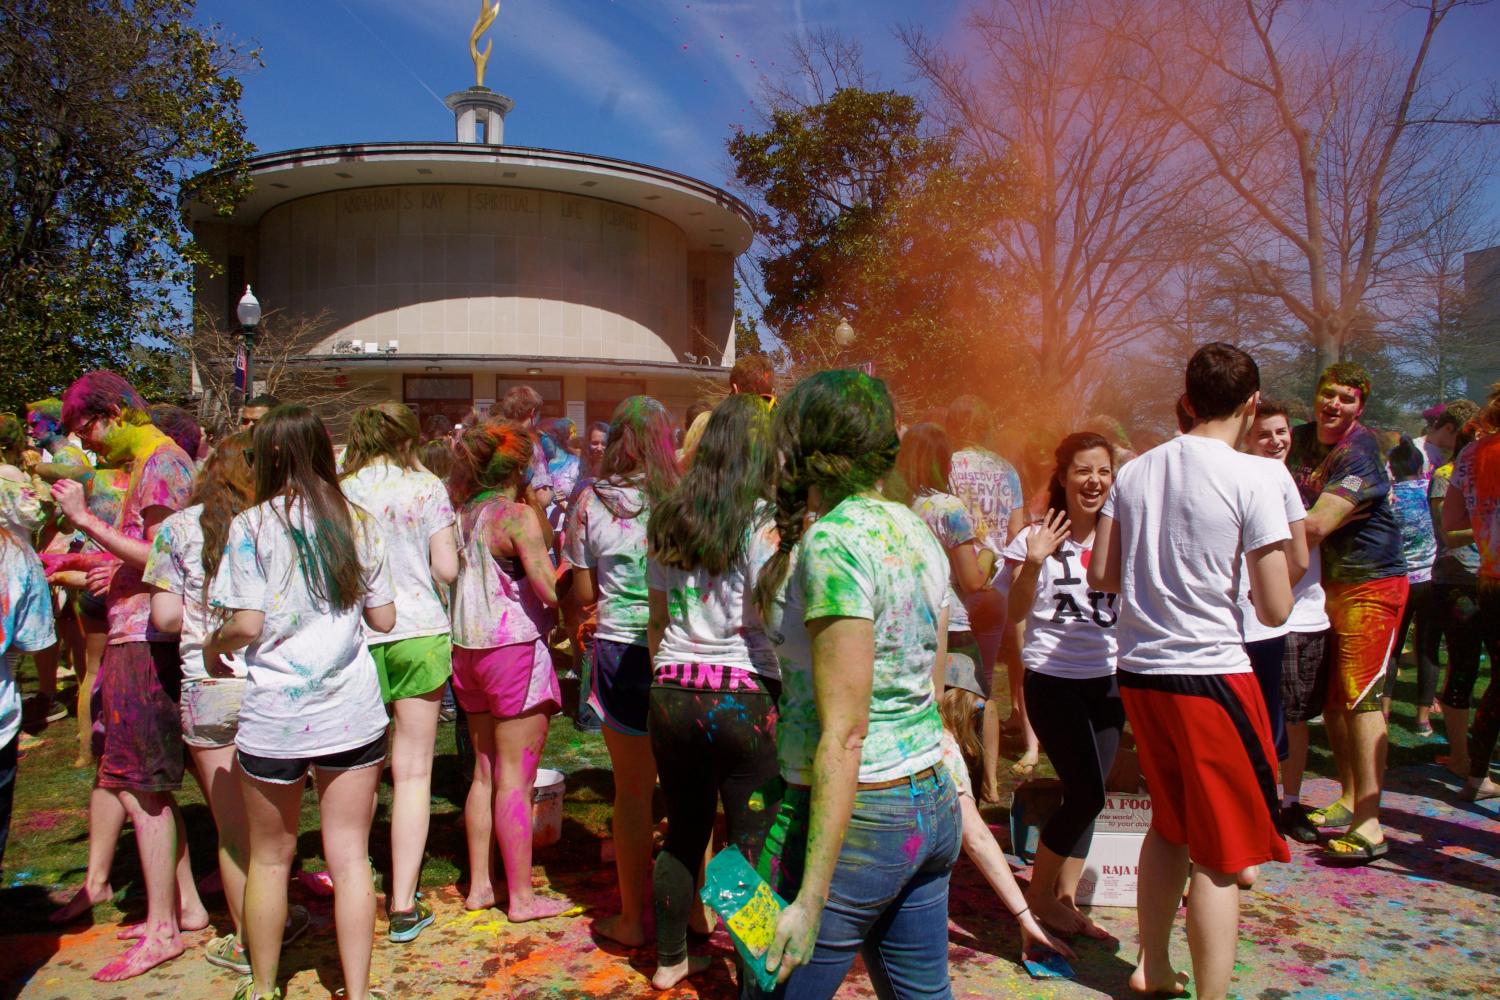 Holi+originated+in+Hindu+tradition+but+has+become+a+trend+on+college+campuses%2C+including+at+AU+on+April+6.